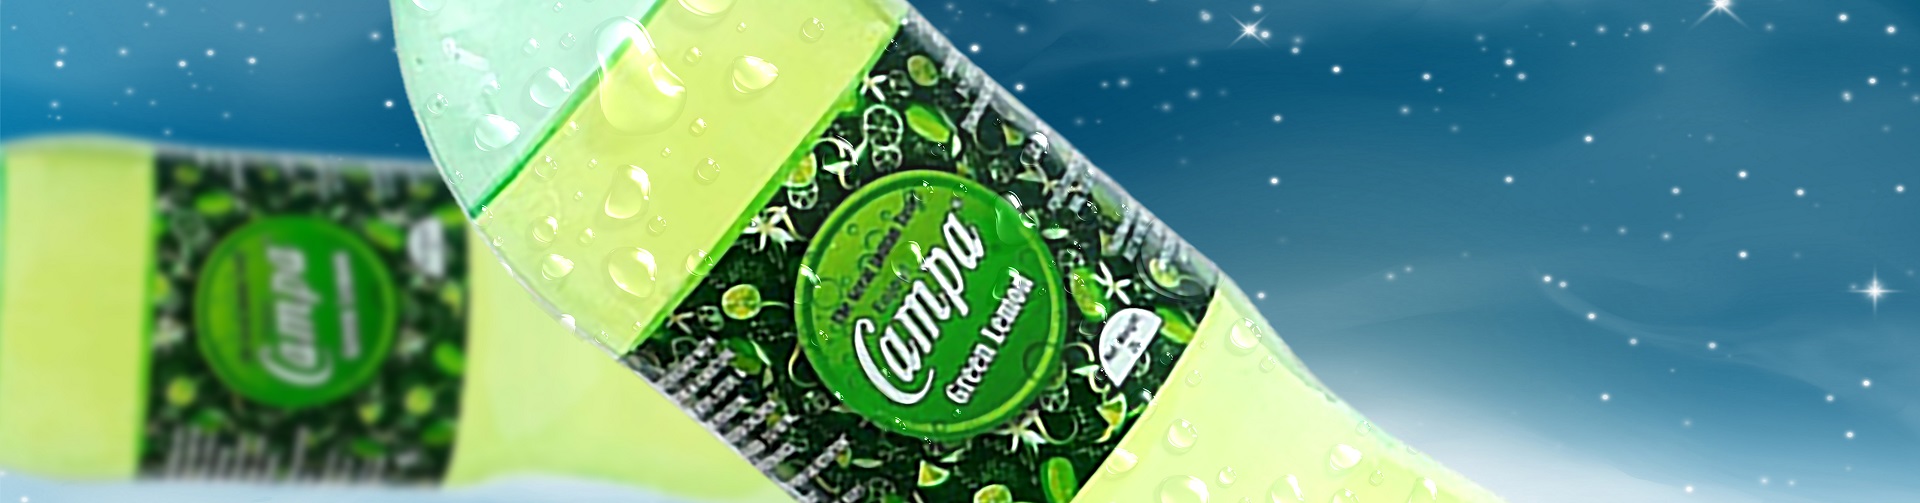 Banner displaying Campa Green Lemon Banner brand and product